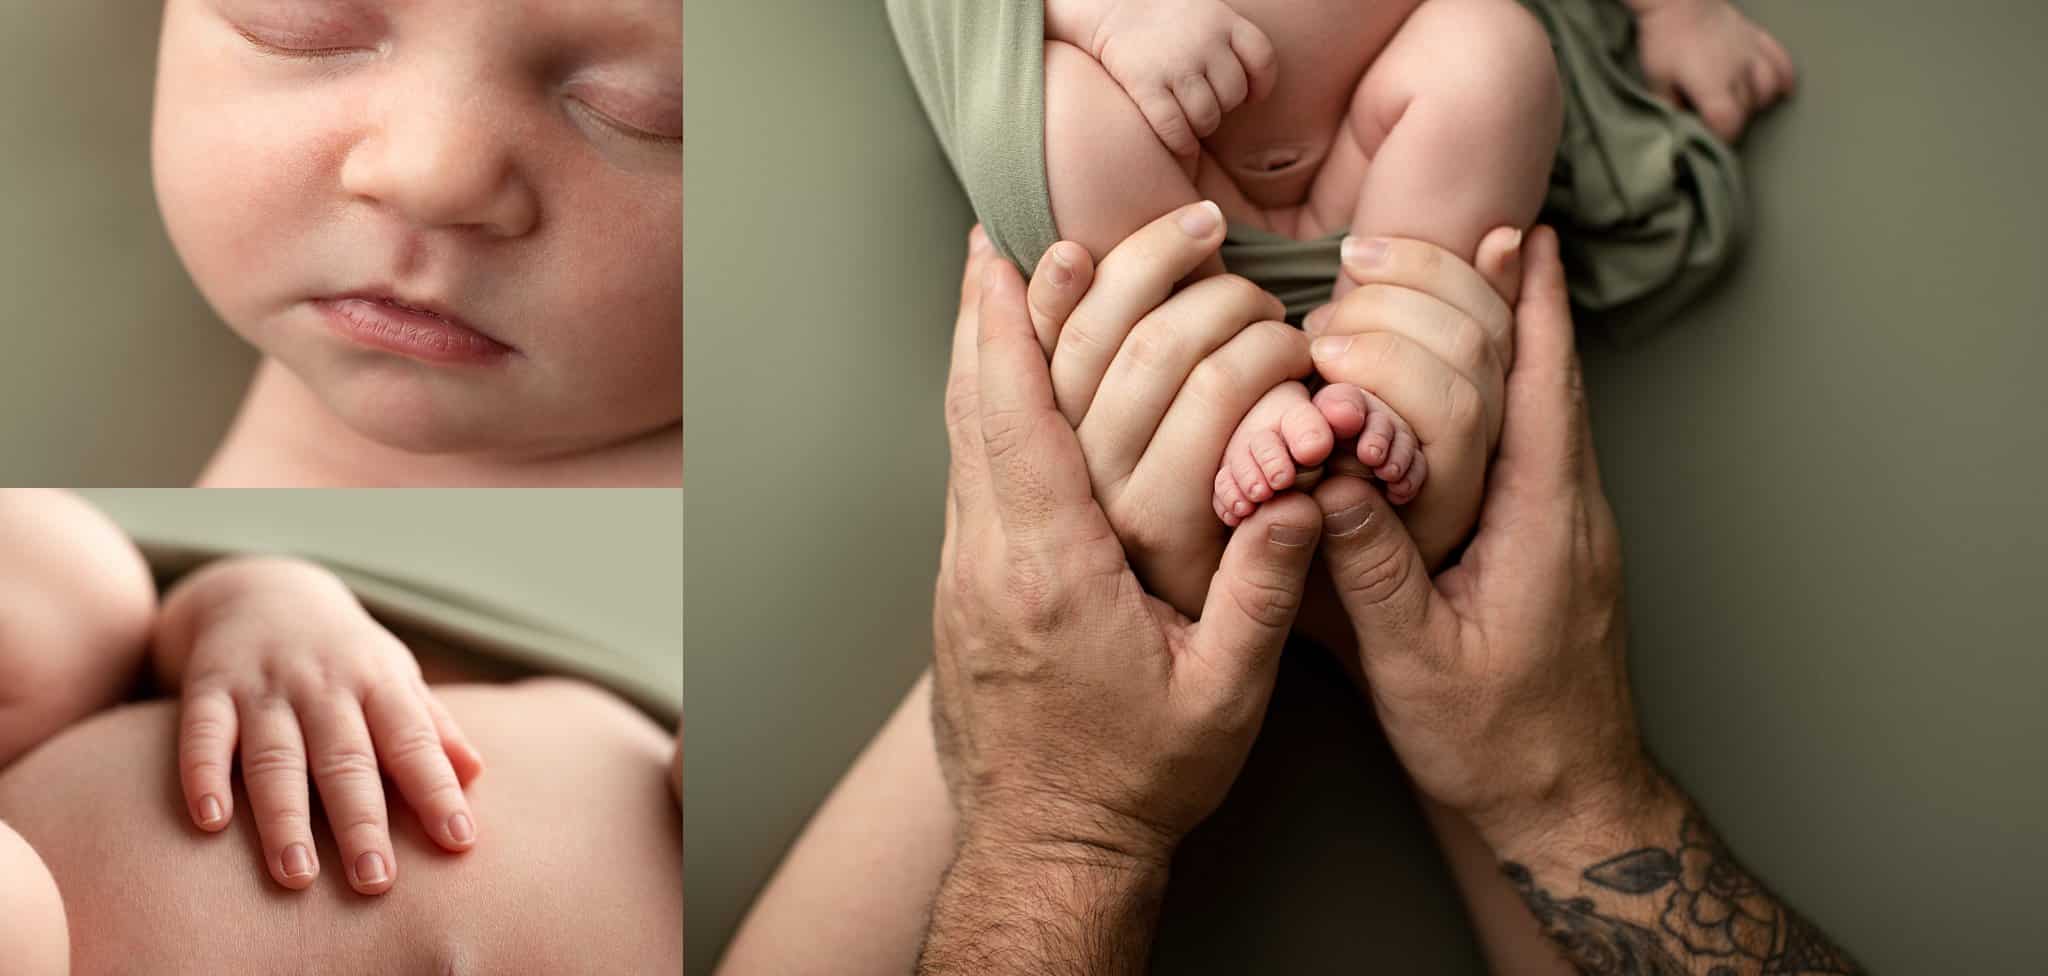 mom and dad holding newborn baby's feet in their hands